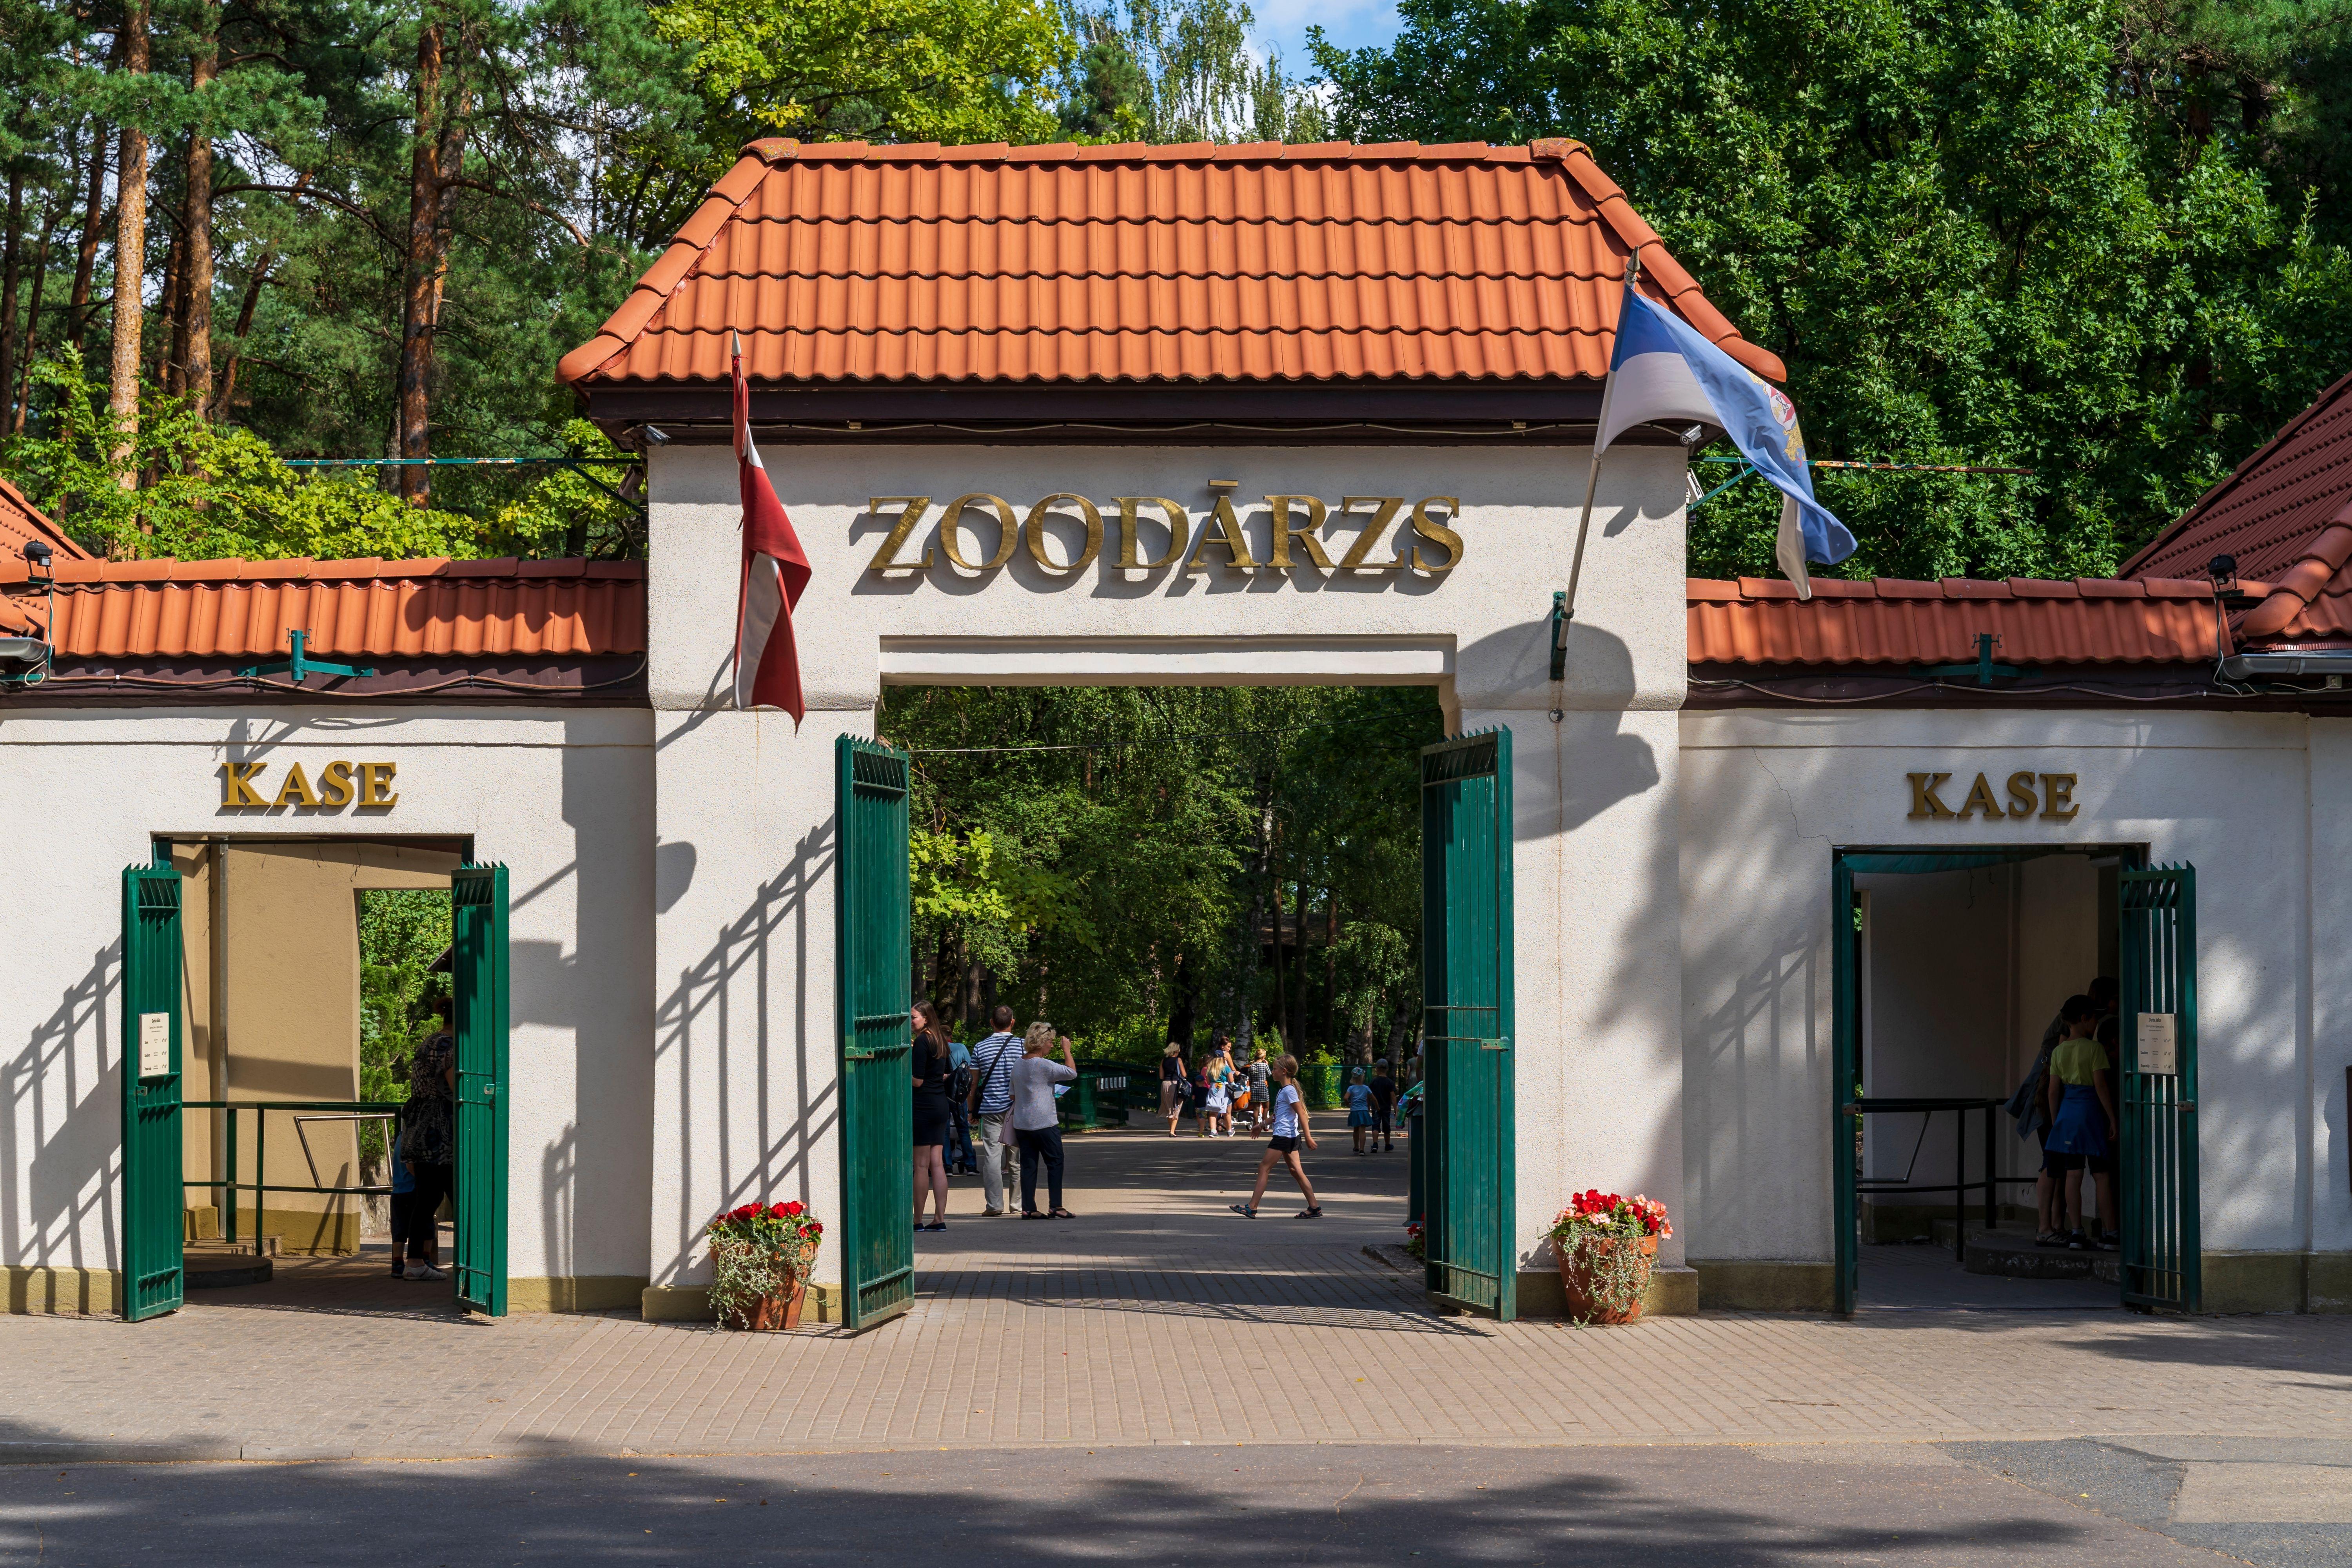 National Zoological Gardens